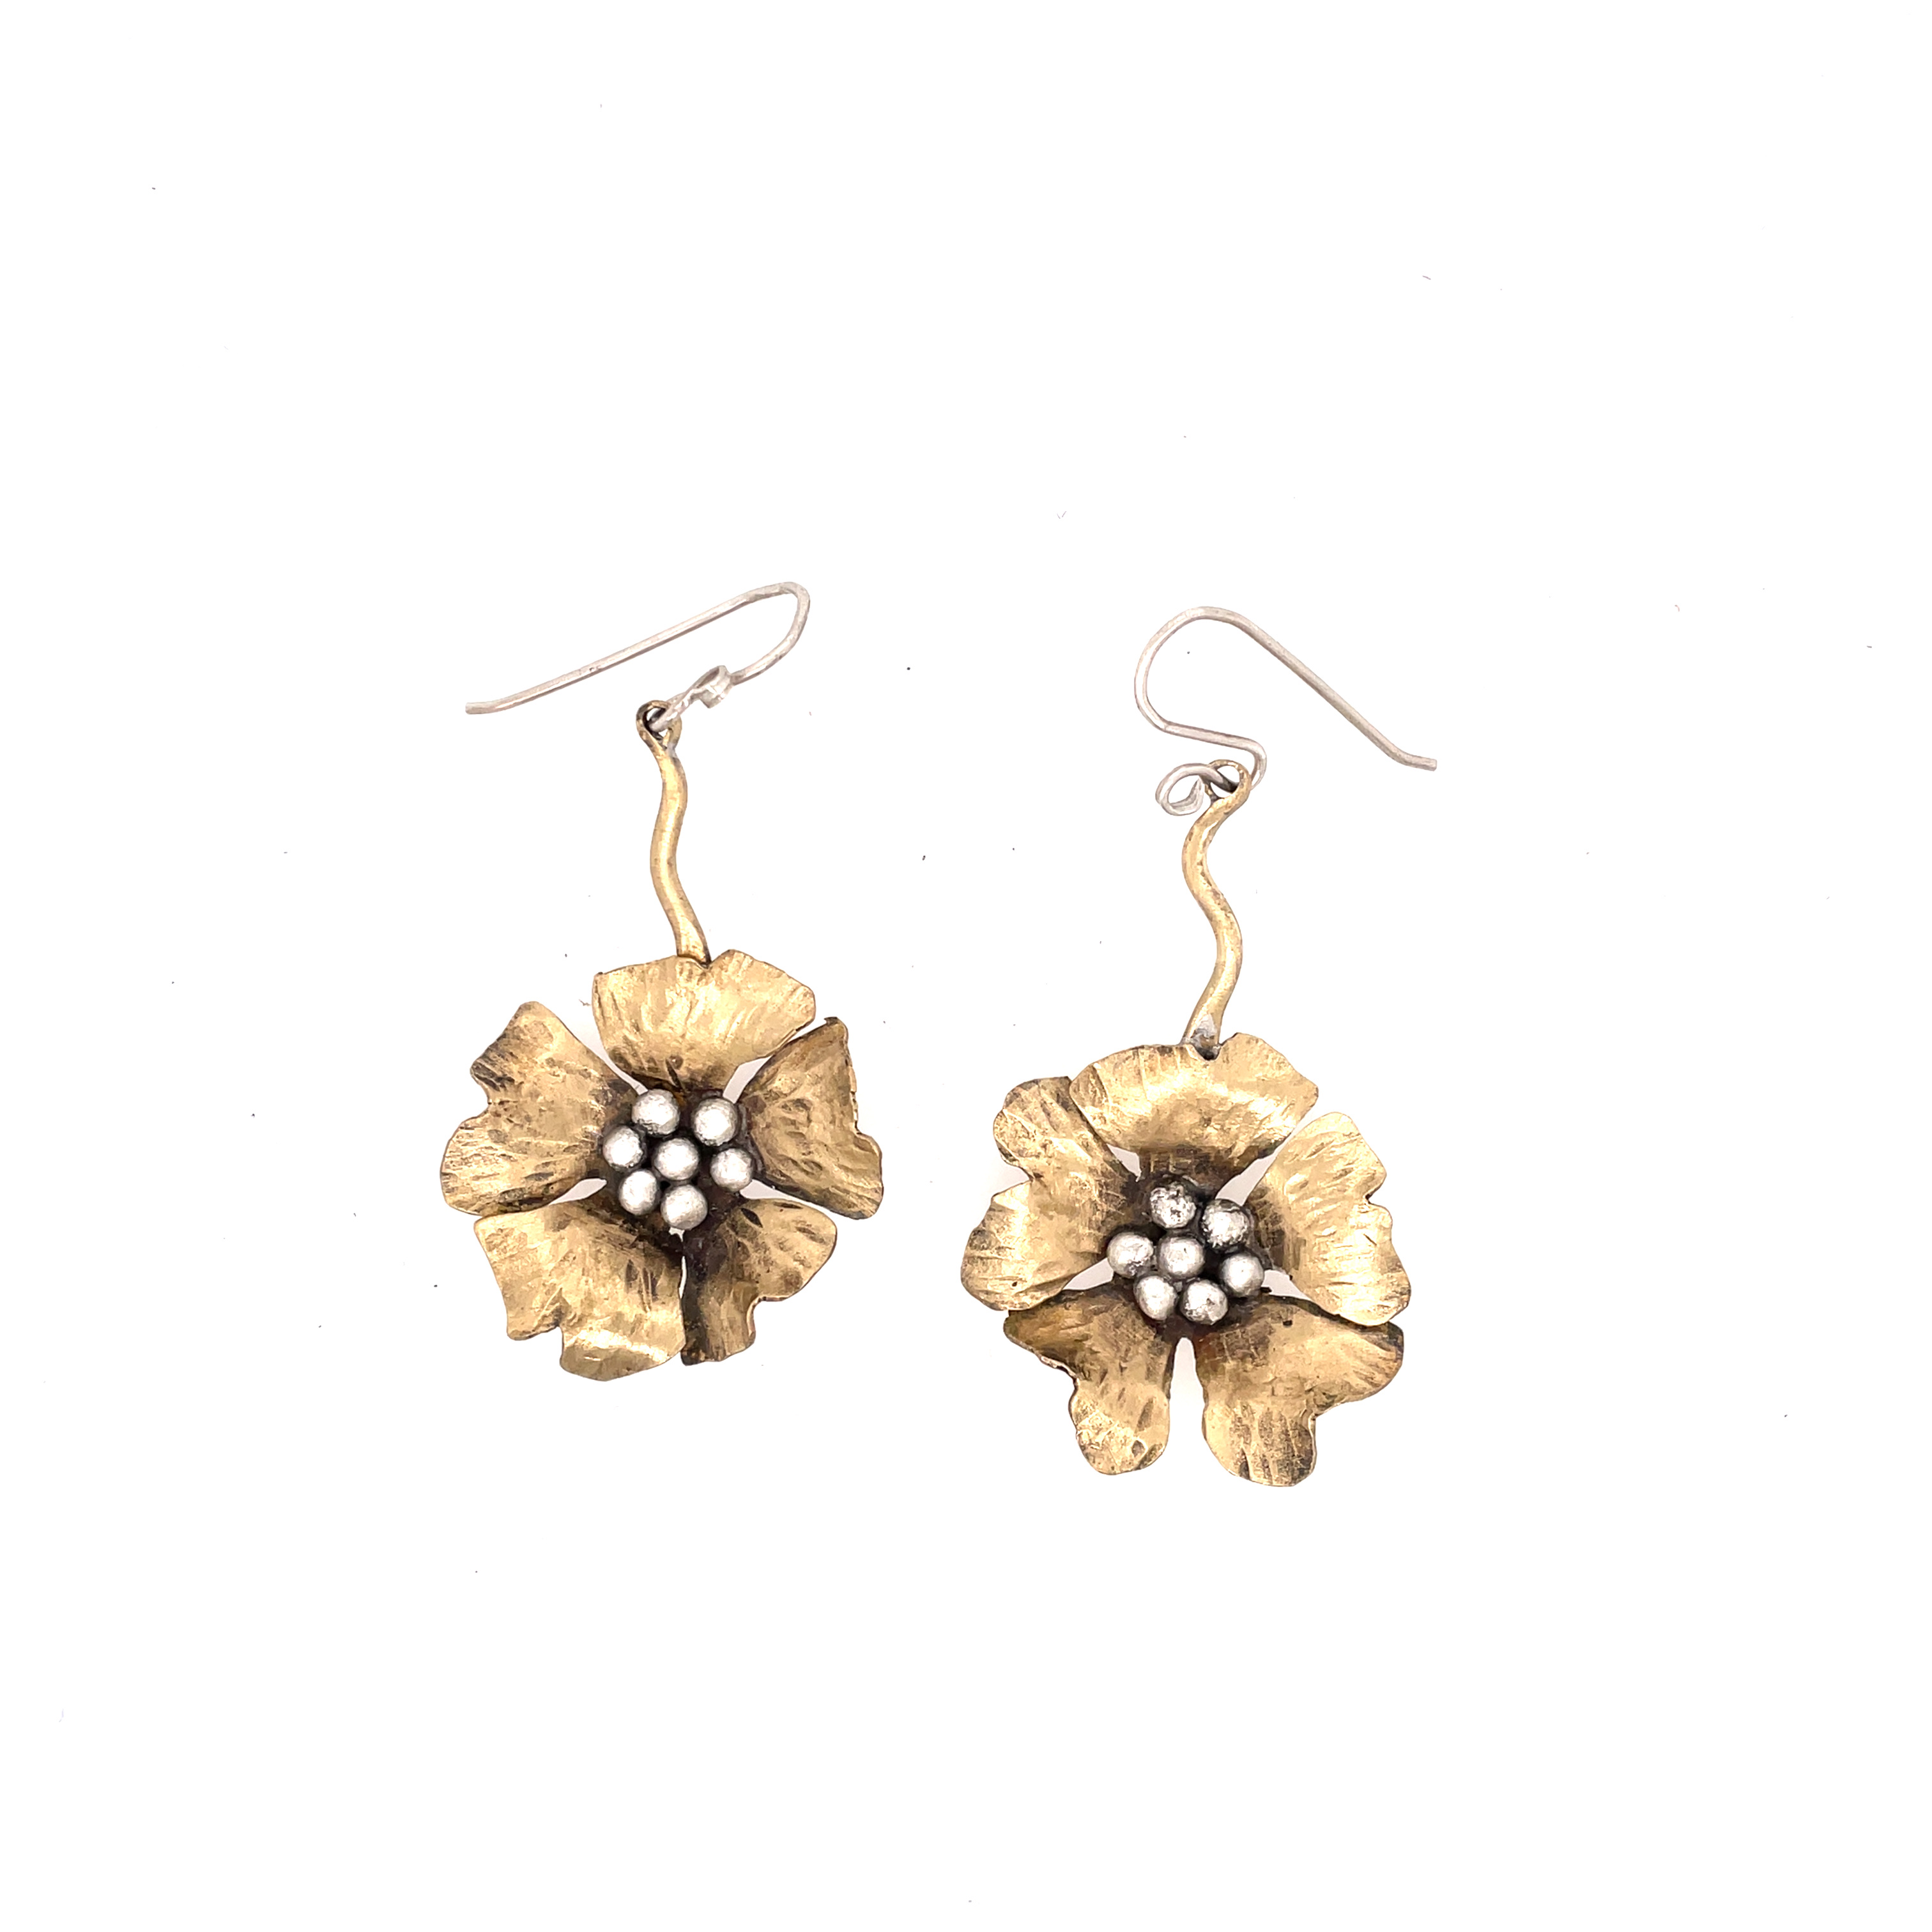 Shortest Small Poppy Wire Earrings - Brass and Silver